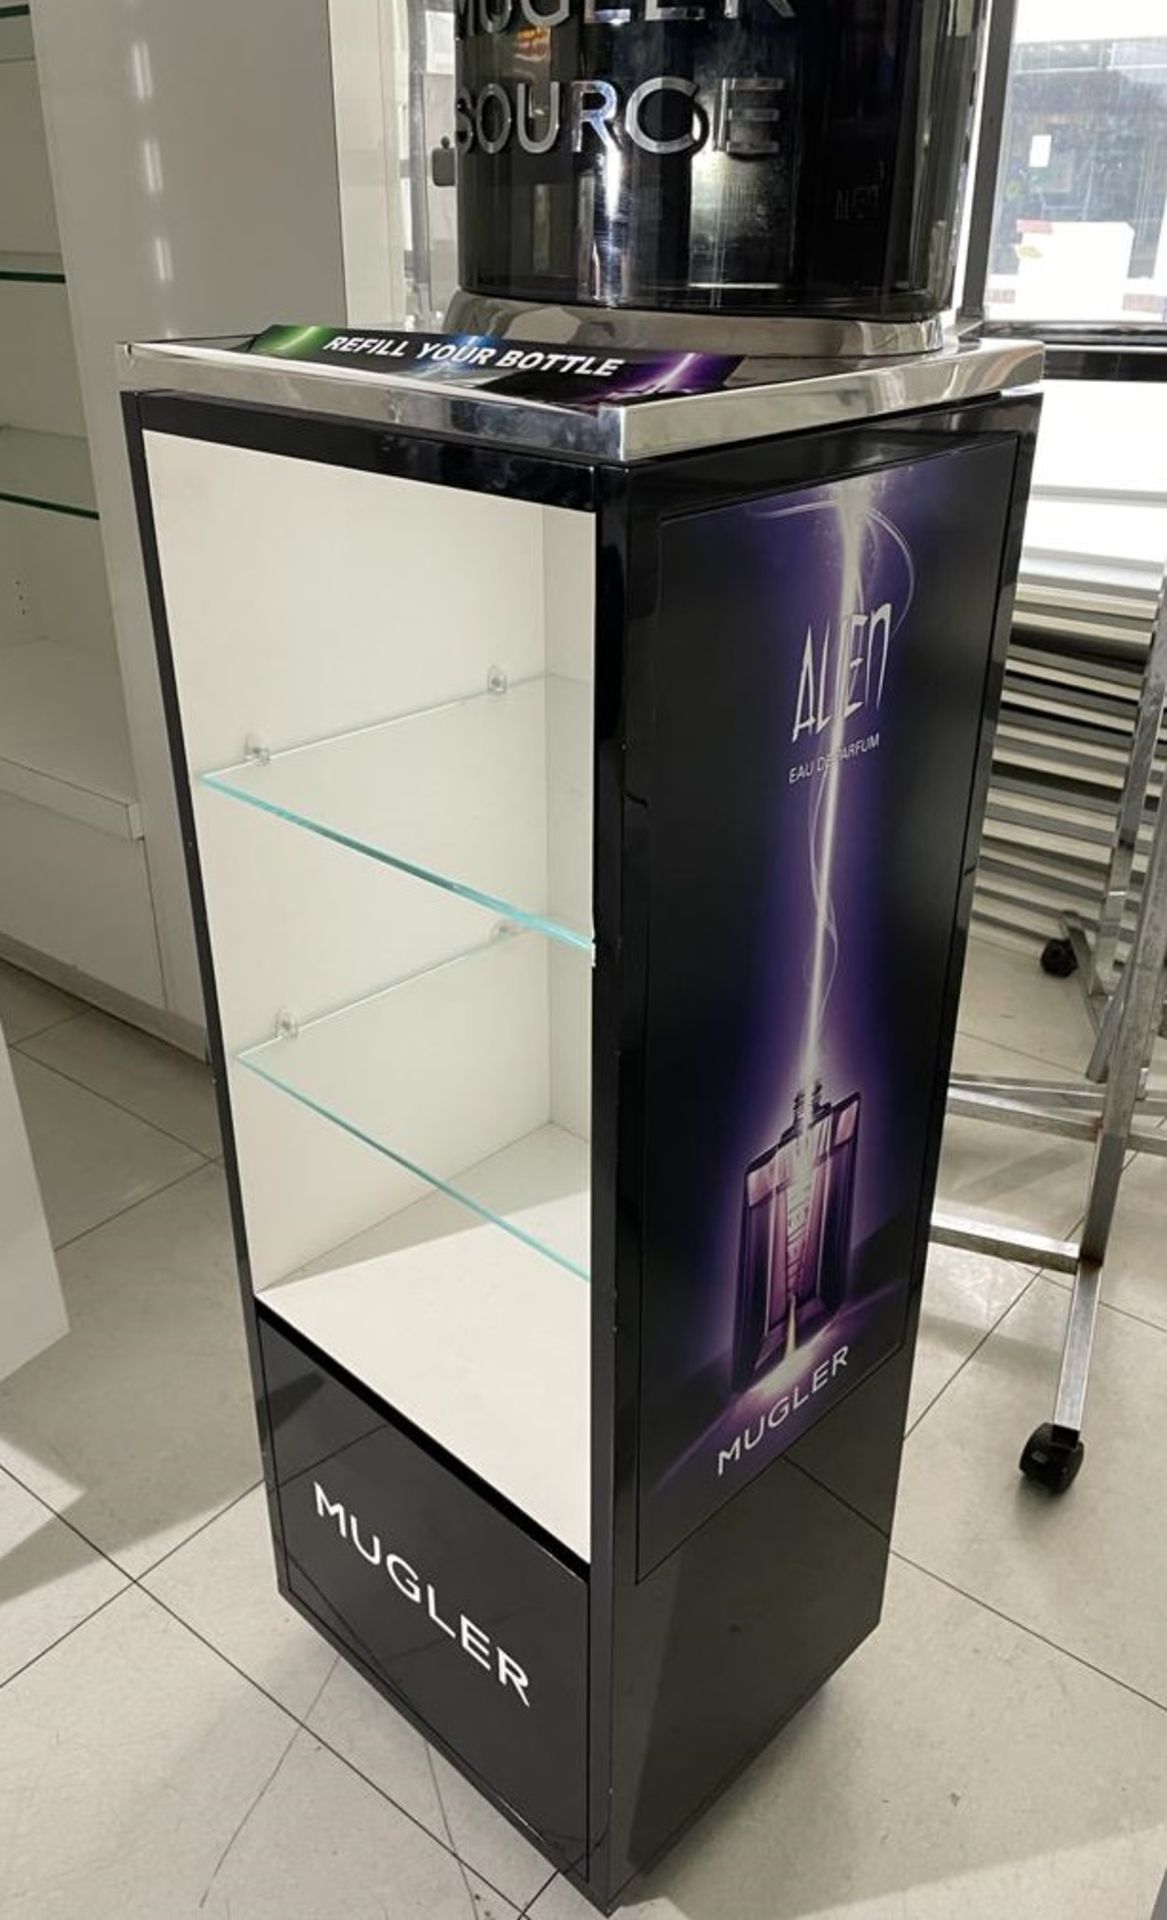 1 x Mugler Source Perfume Refill Station With Display Cabinet - Size H169 x W38 x D33 cms - - Image 4 of 10